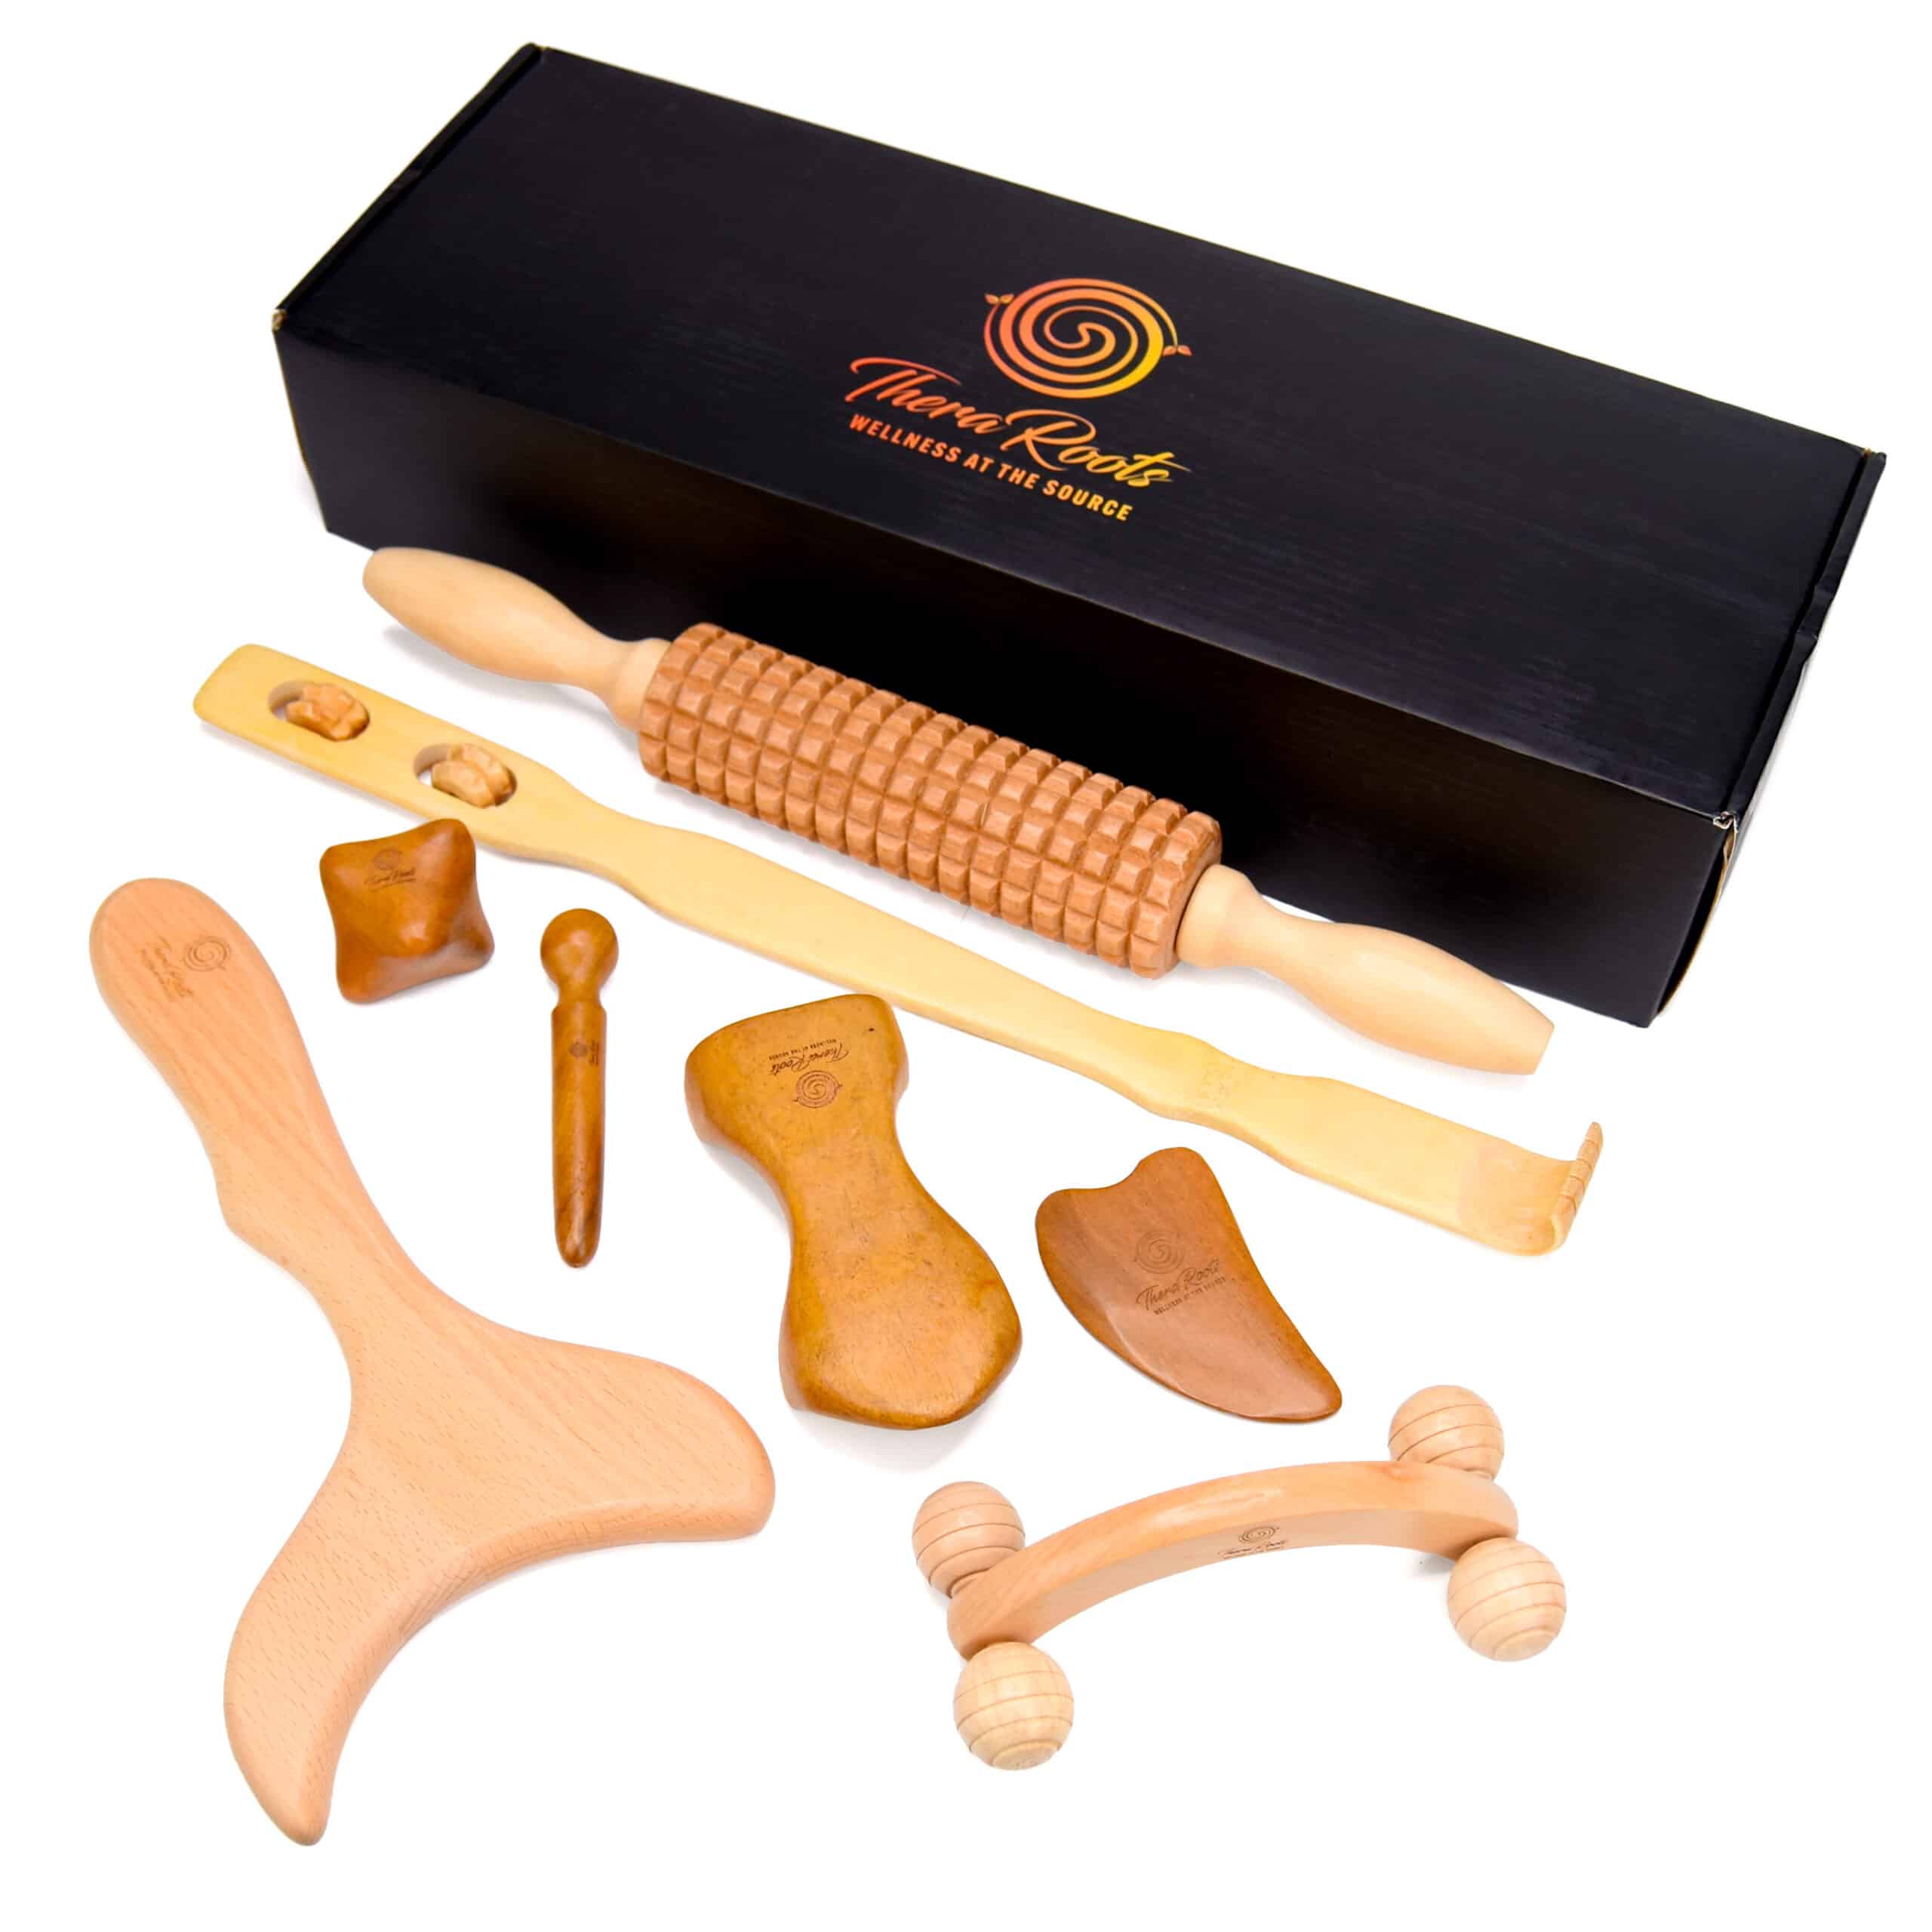 TheraRoots wood therapy kit